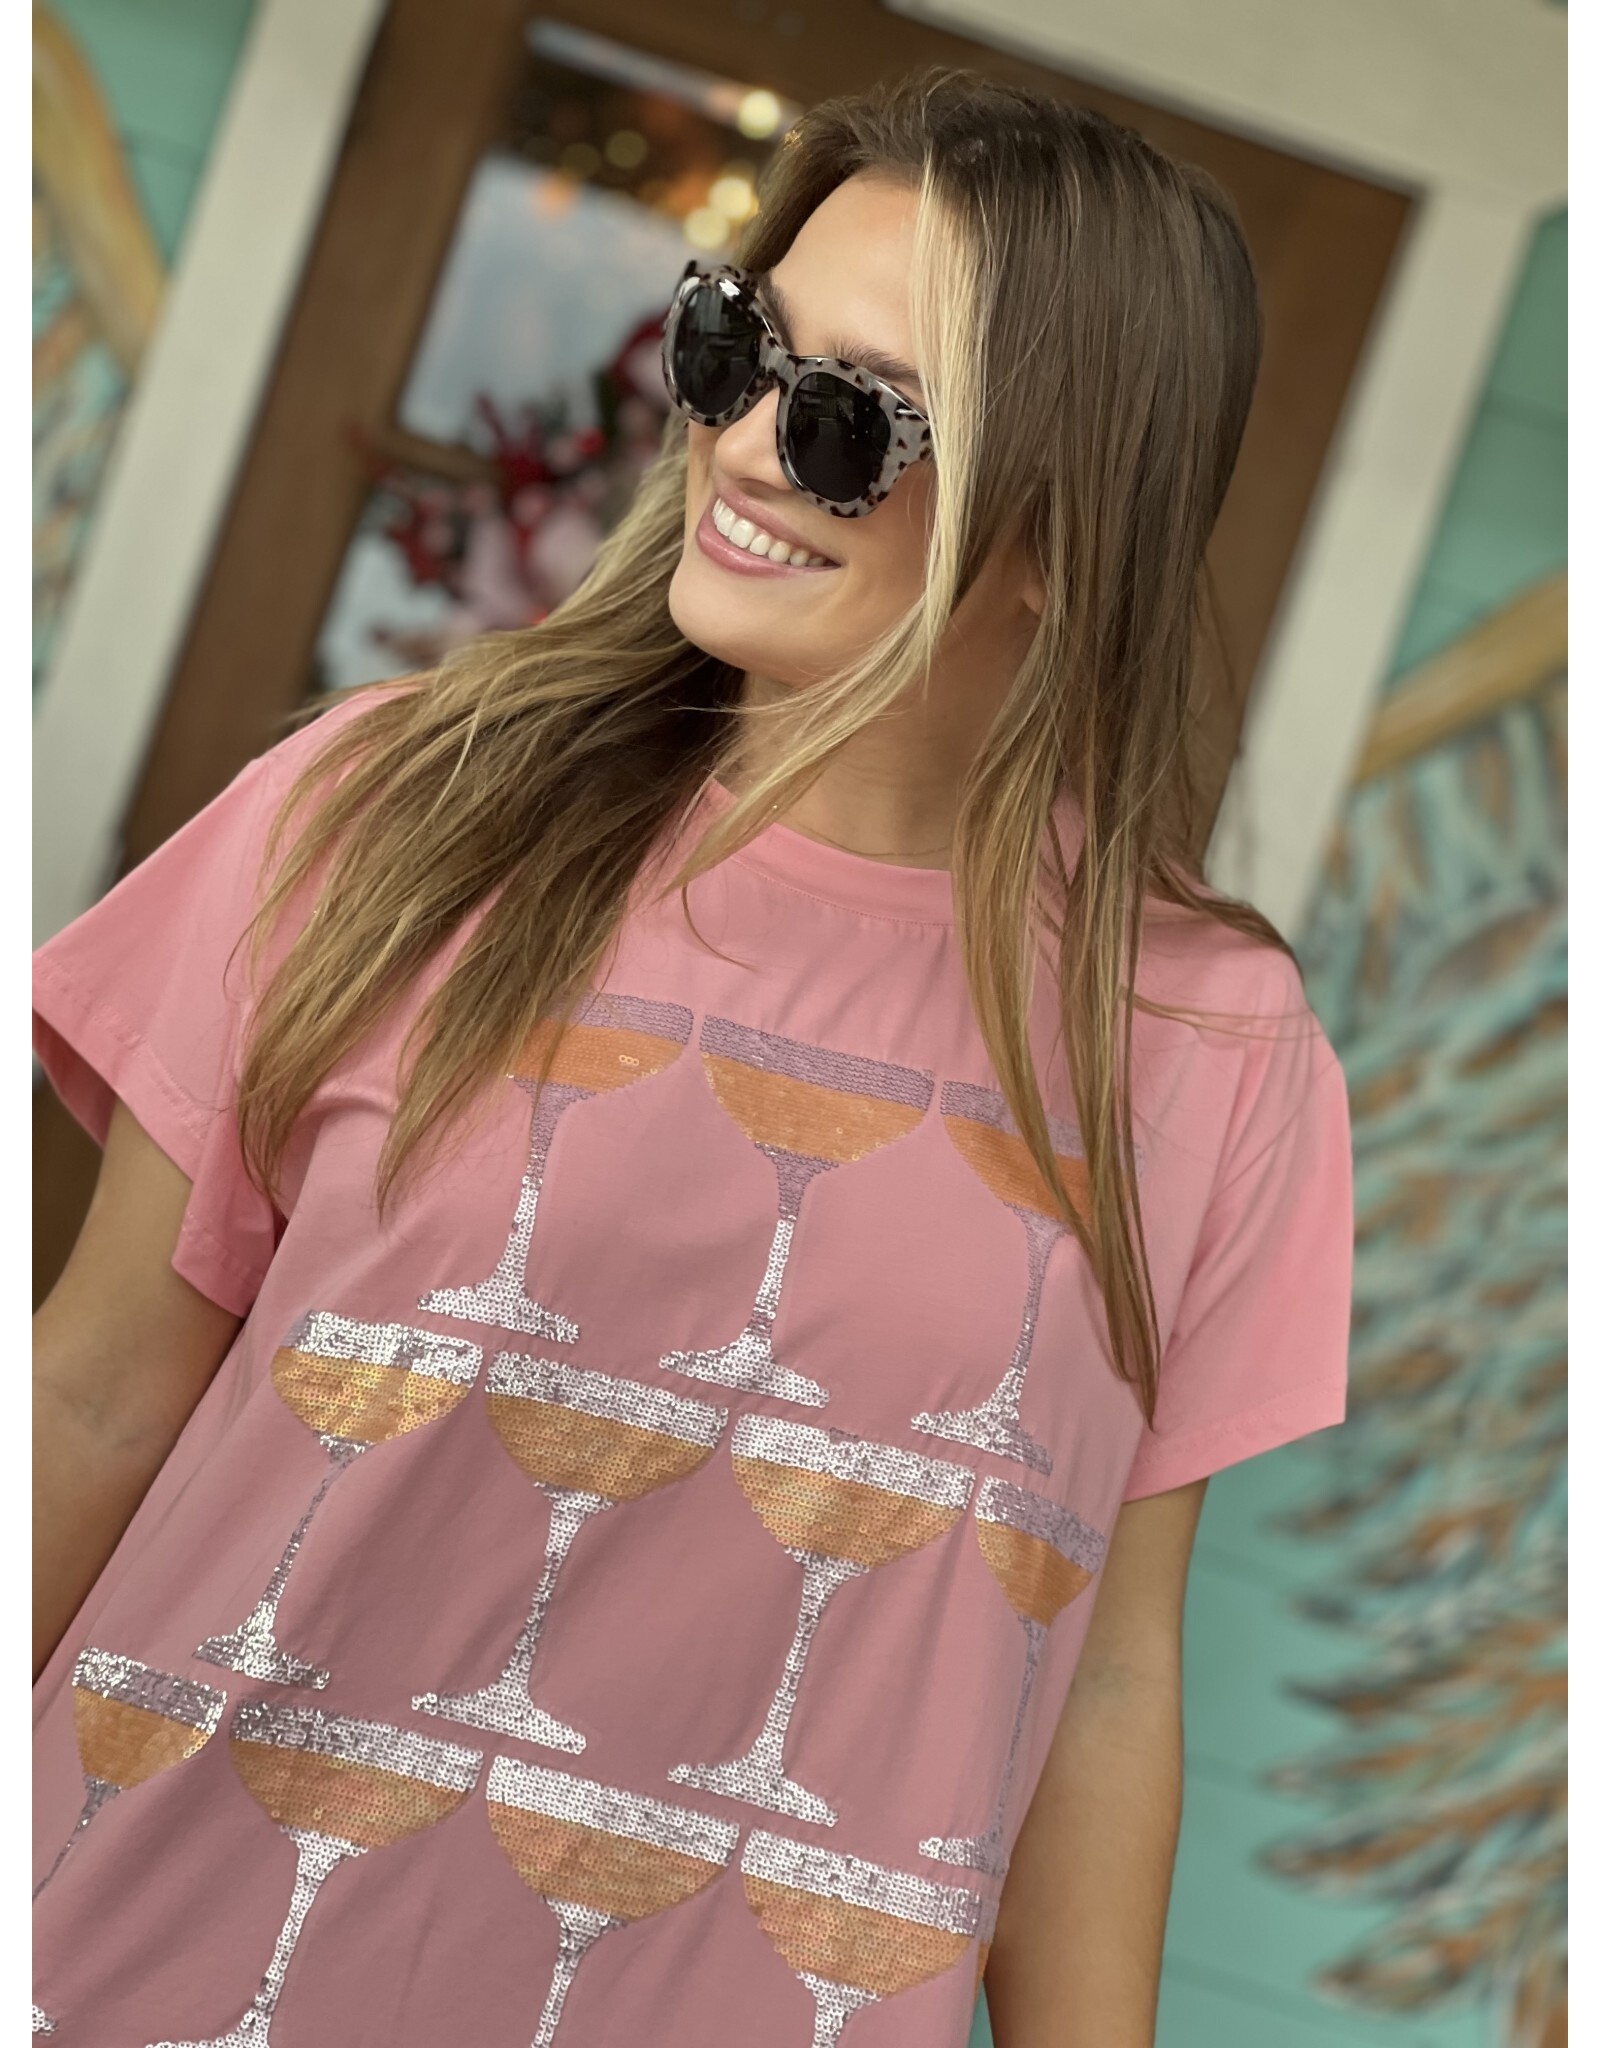 Queen of Sparkles Pink ChampagneTower Tee